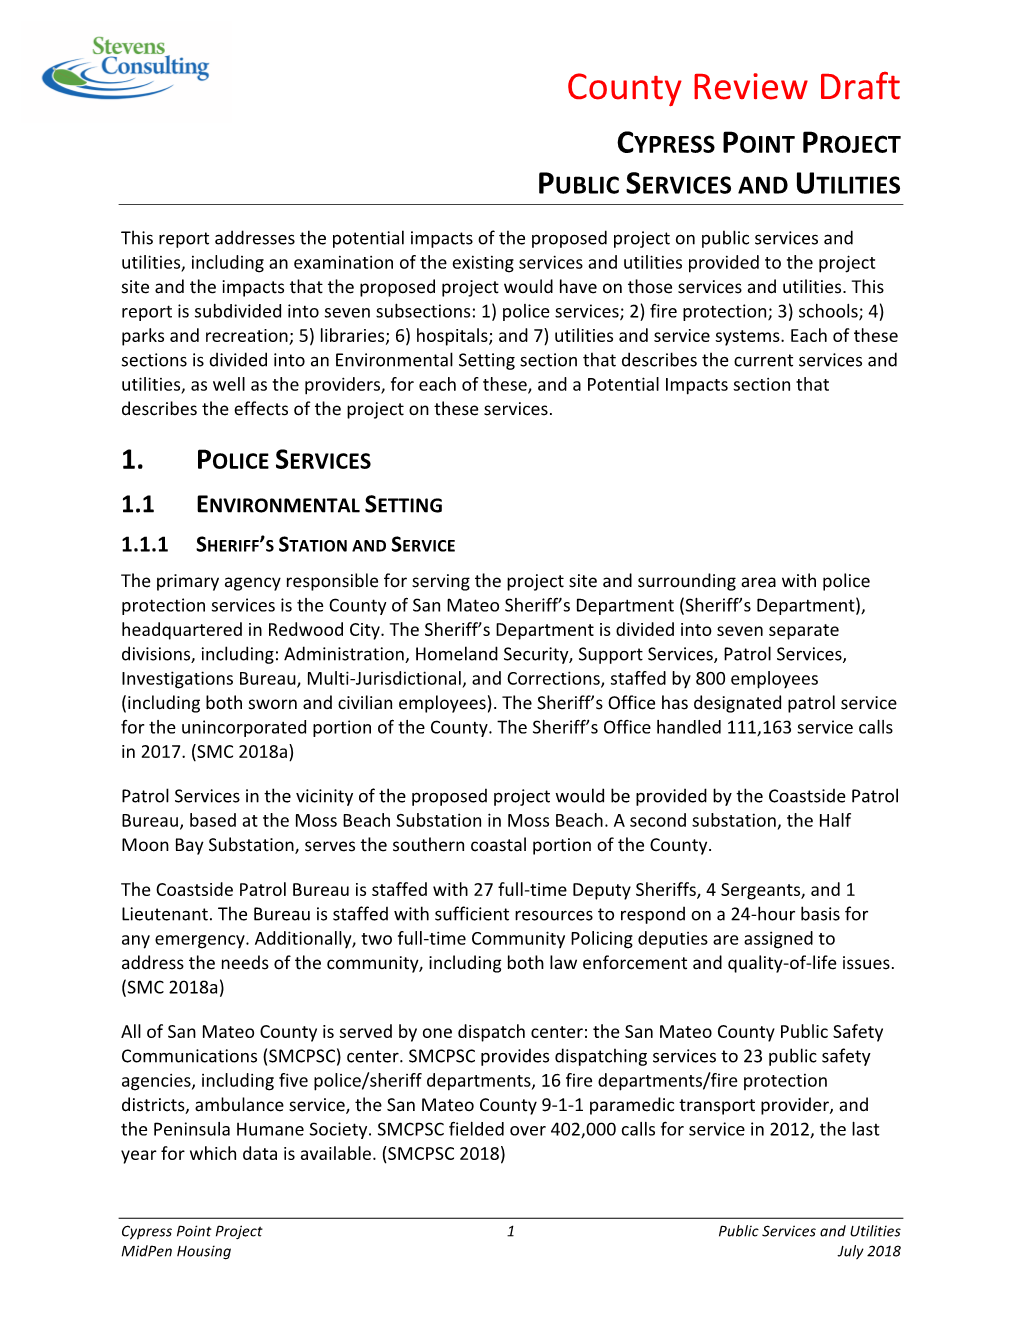 County Review Draft CYPRESS POINT PROJECT PUBLIC SERVICES and UTILITIES